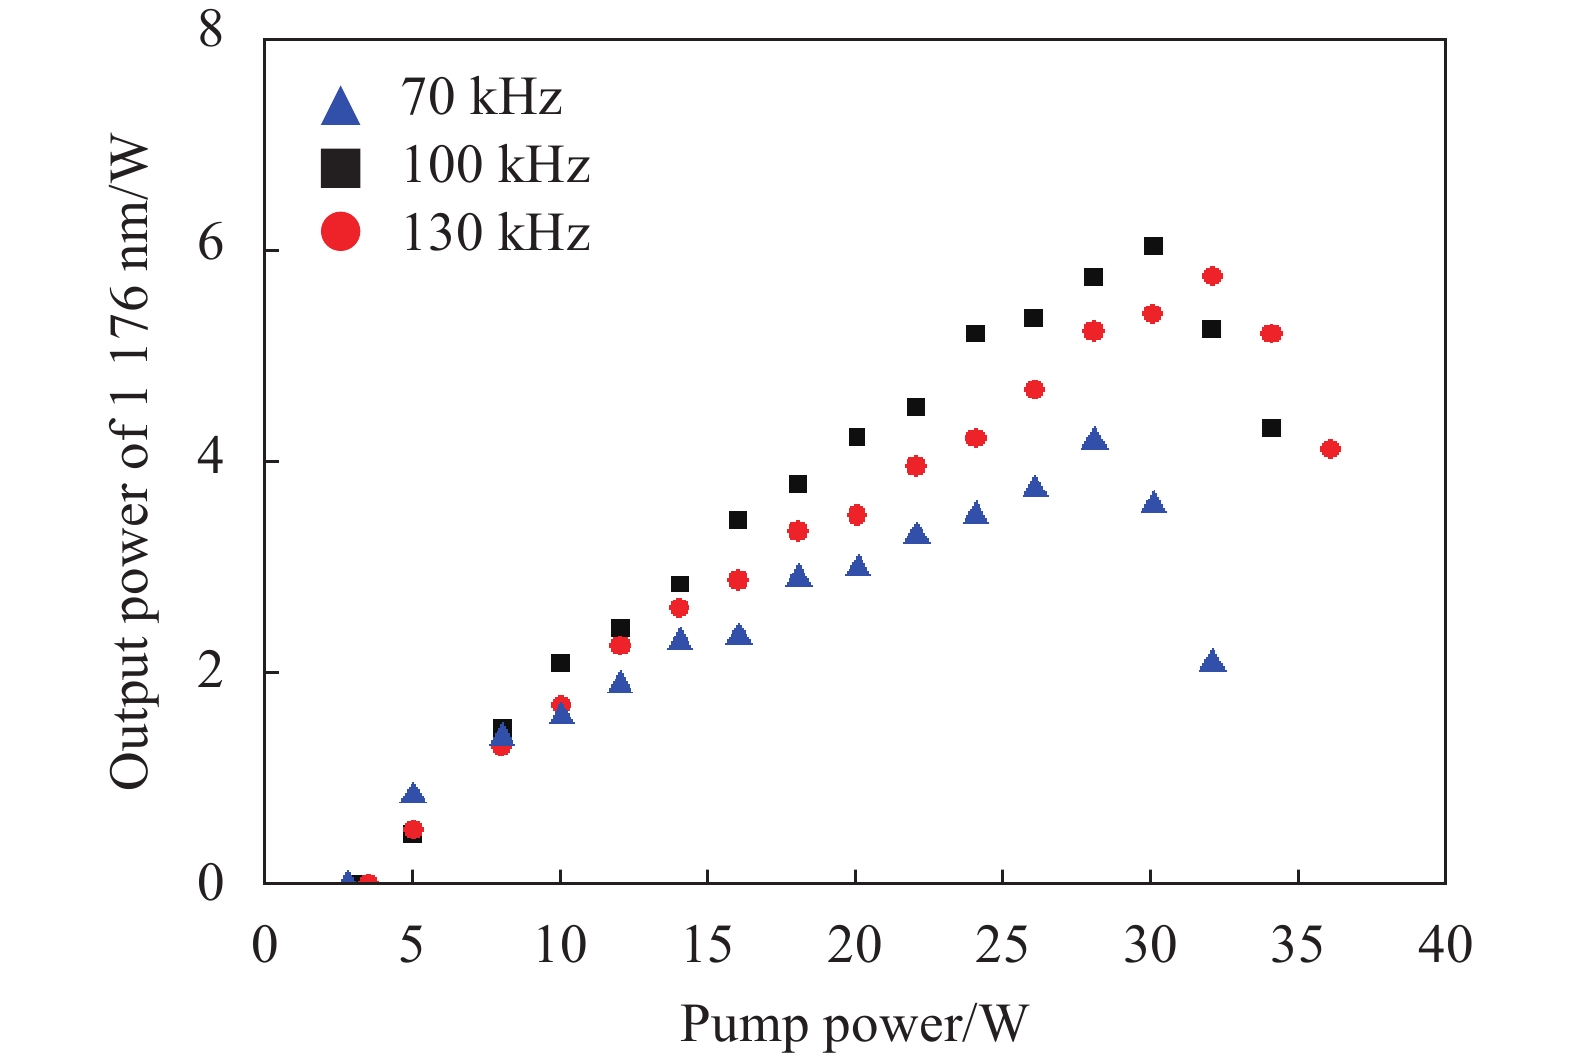 Relationship between output power and pump power of the 1176 nm under continuous-wave pumping